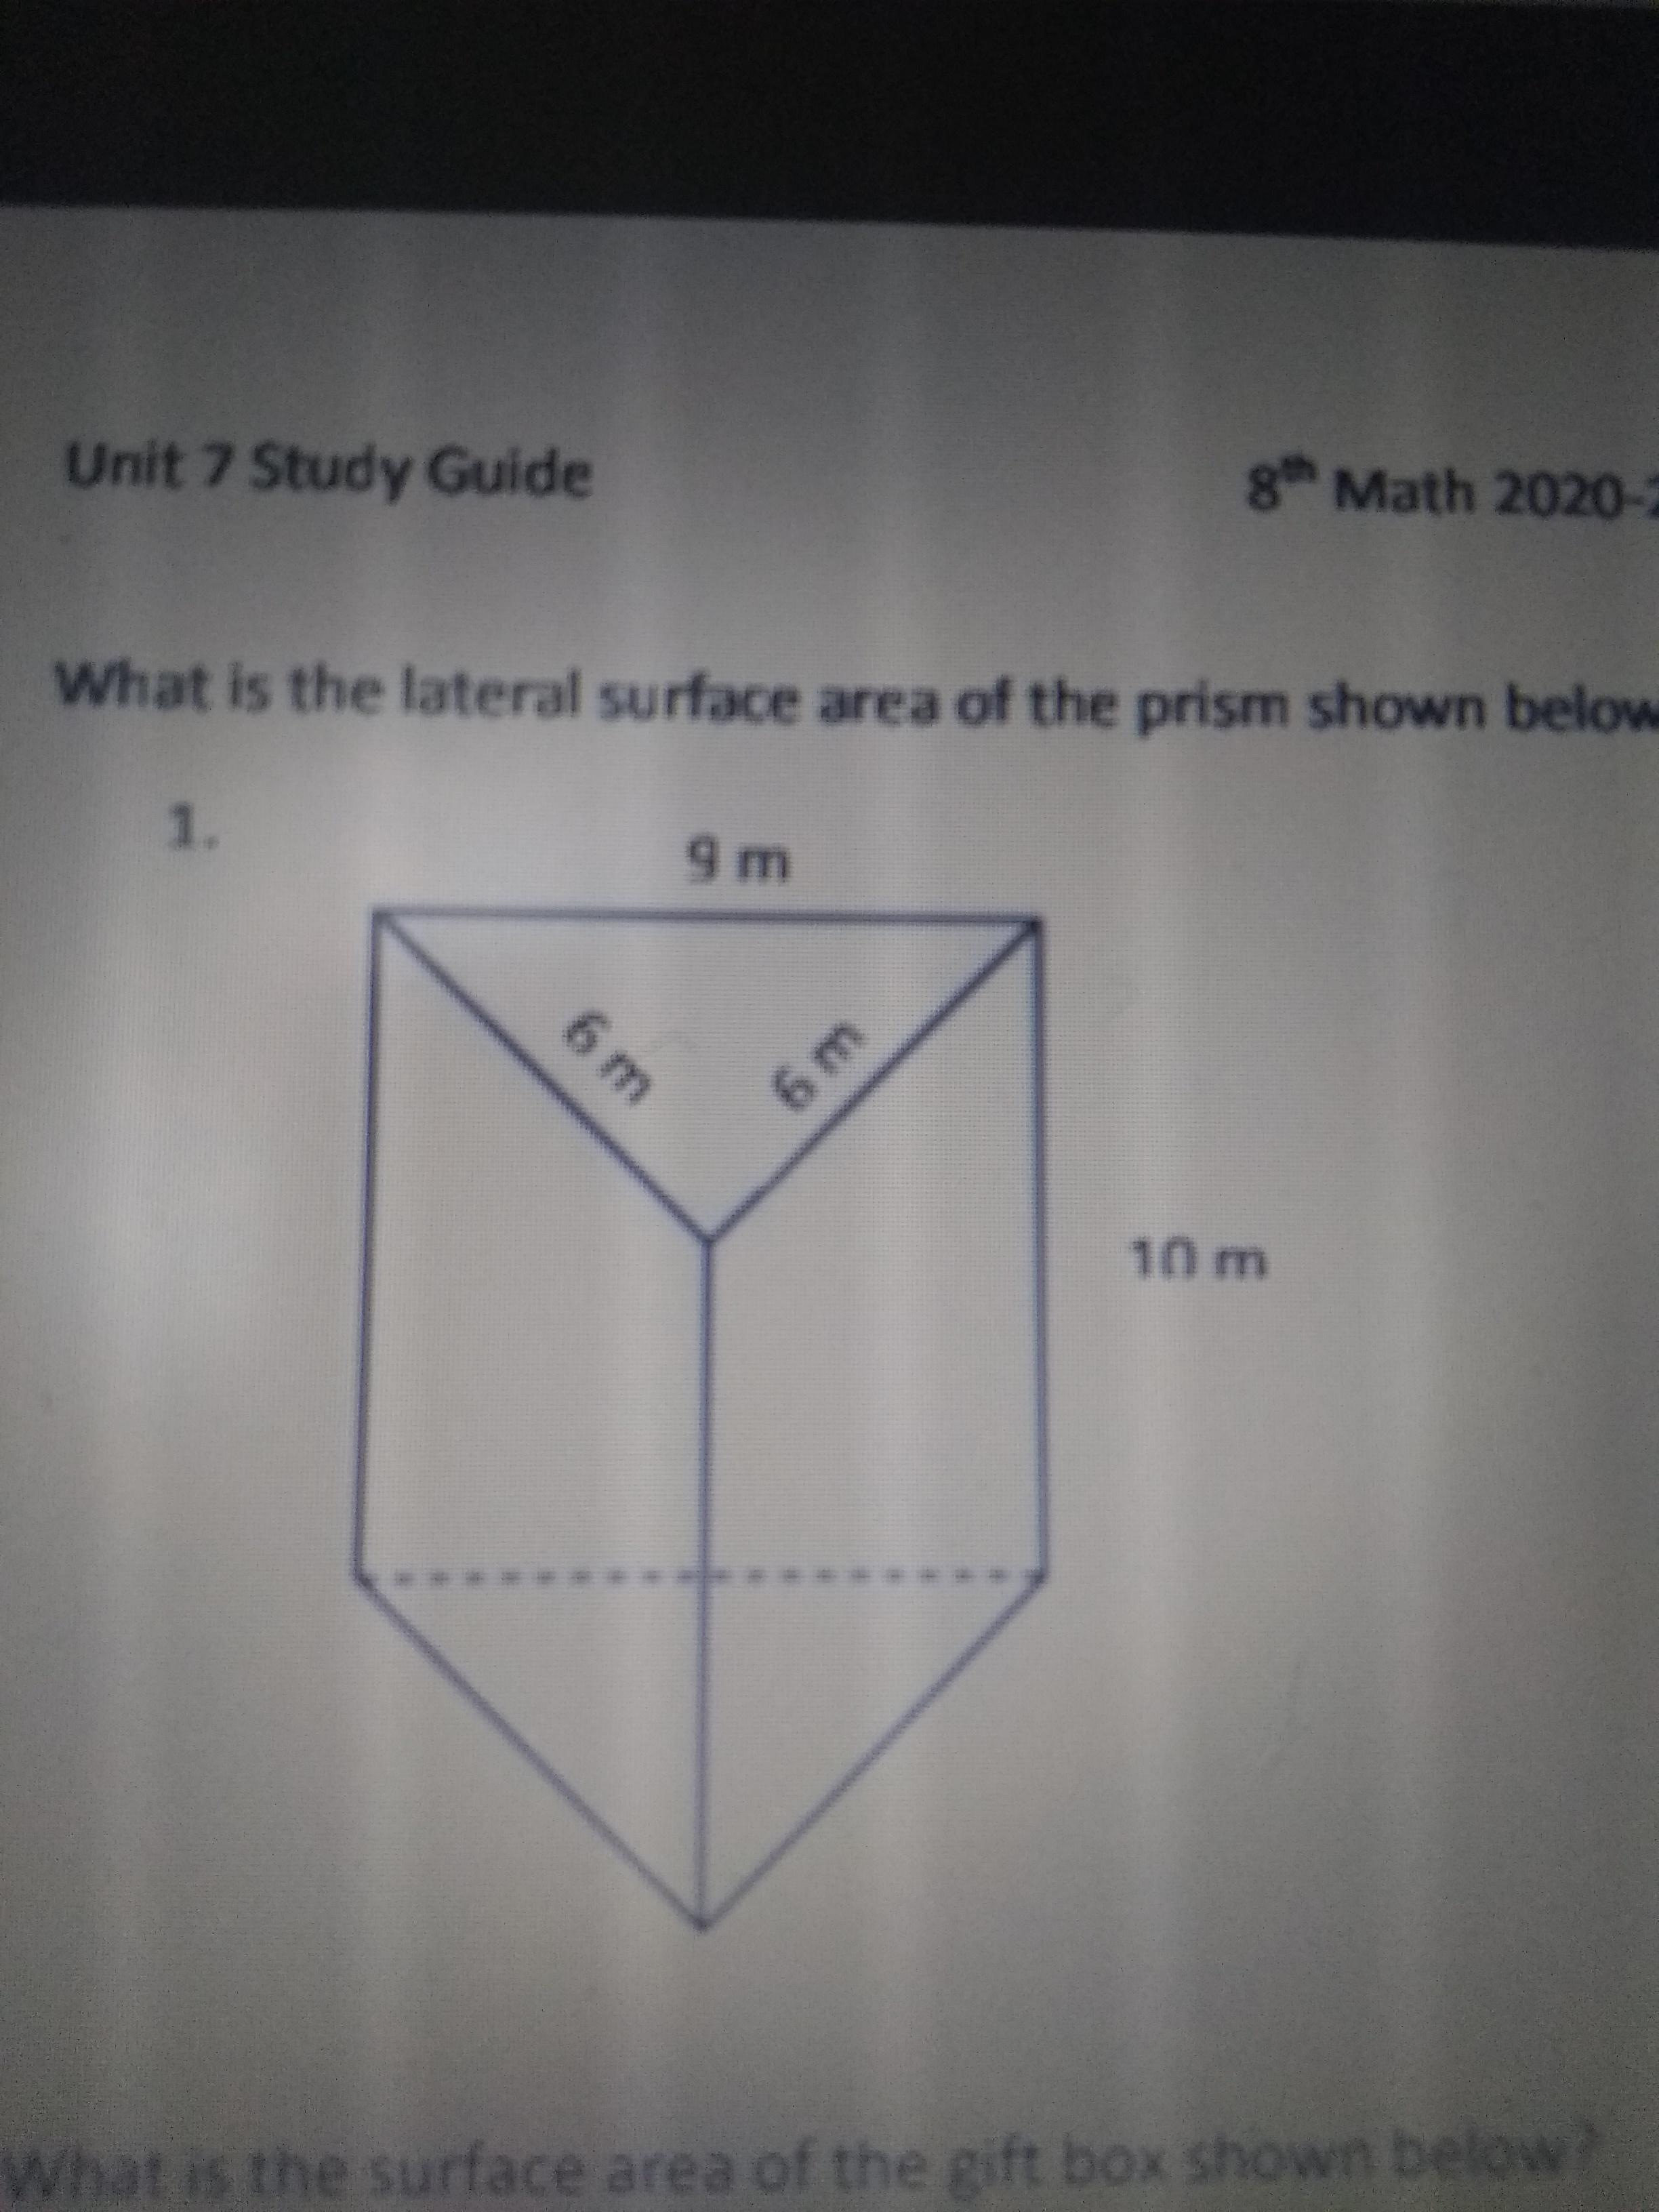 What Is The Lateral Surface Area Of The Prism Shown Below? 9 M 6m 6 M 10 M